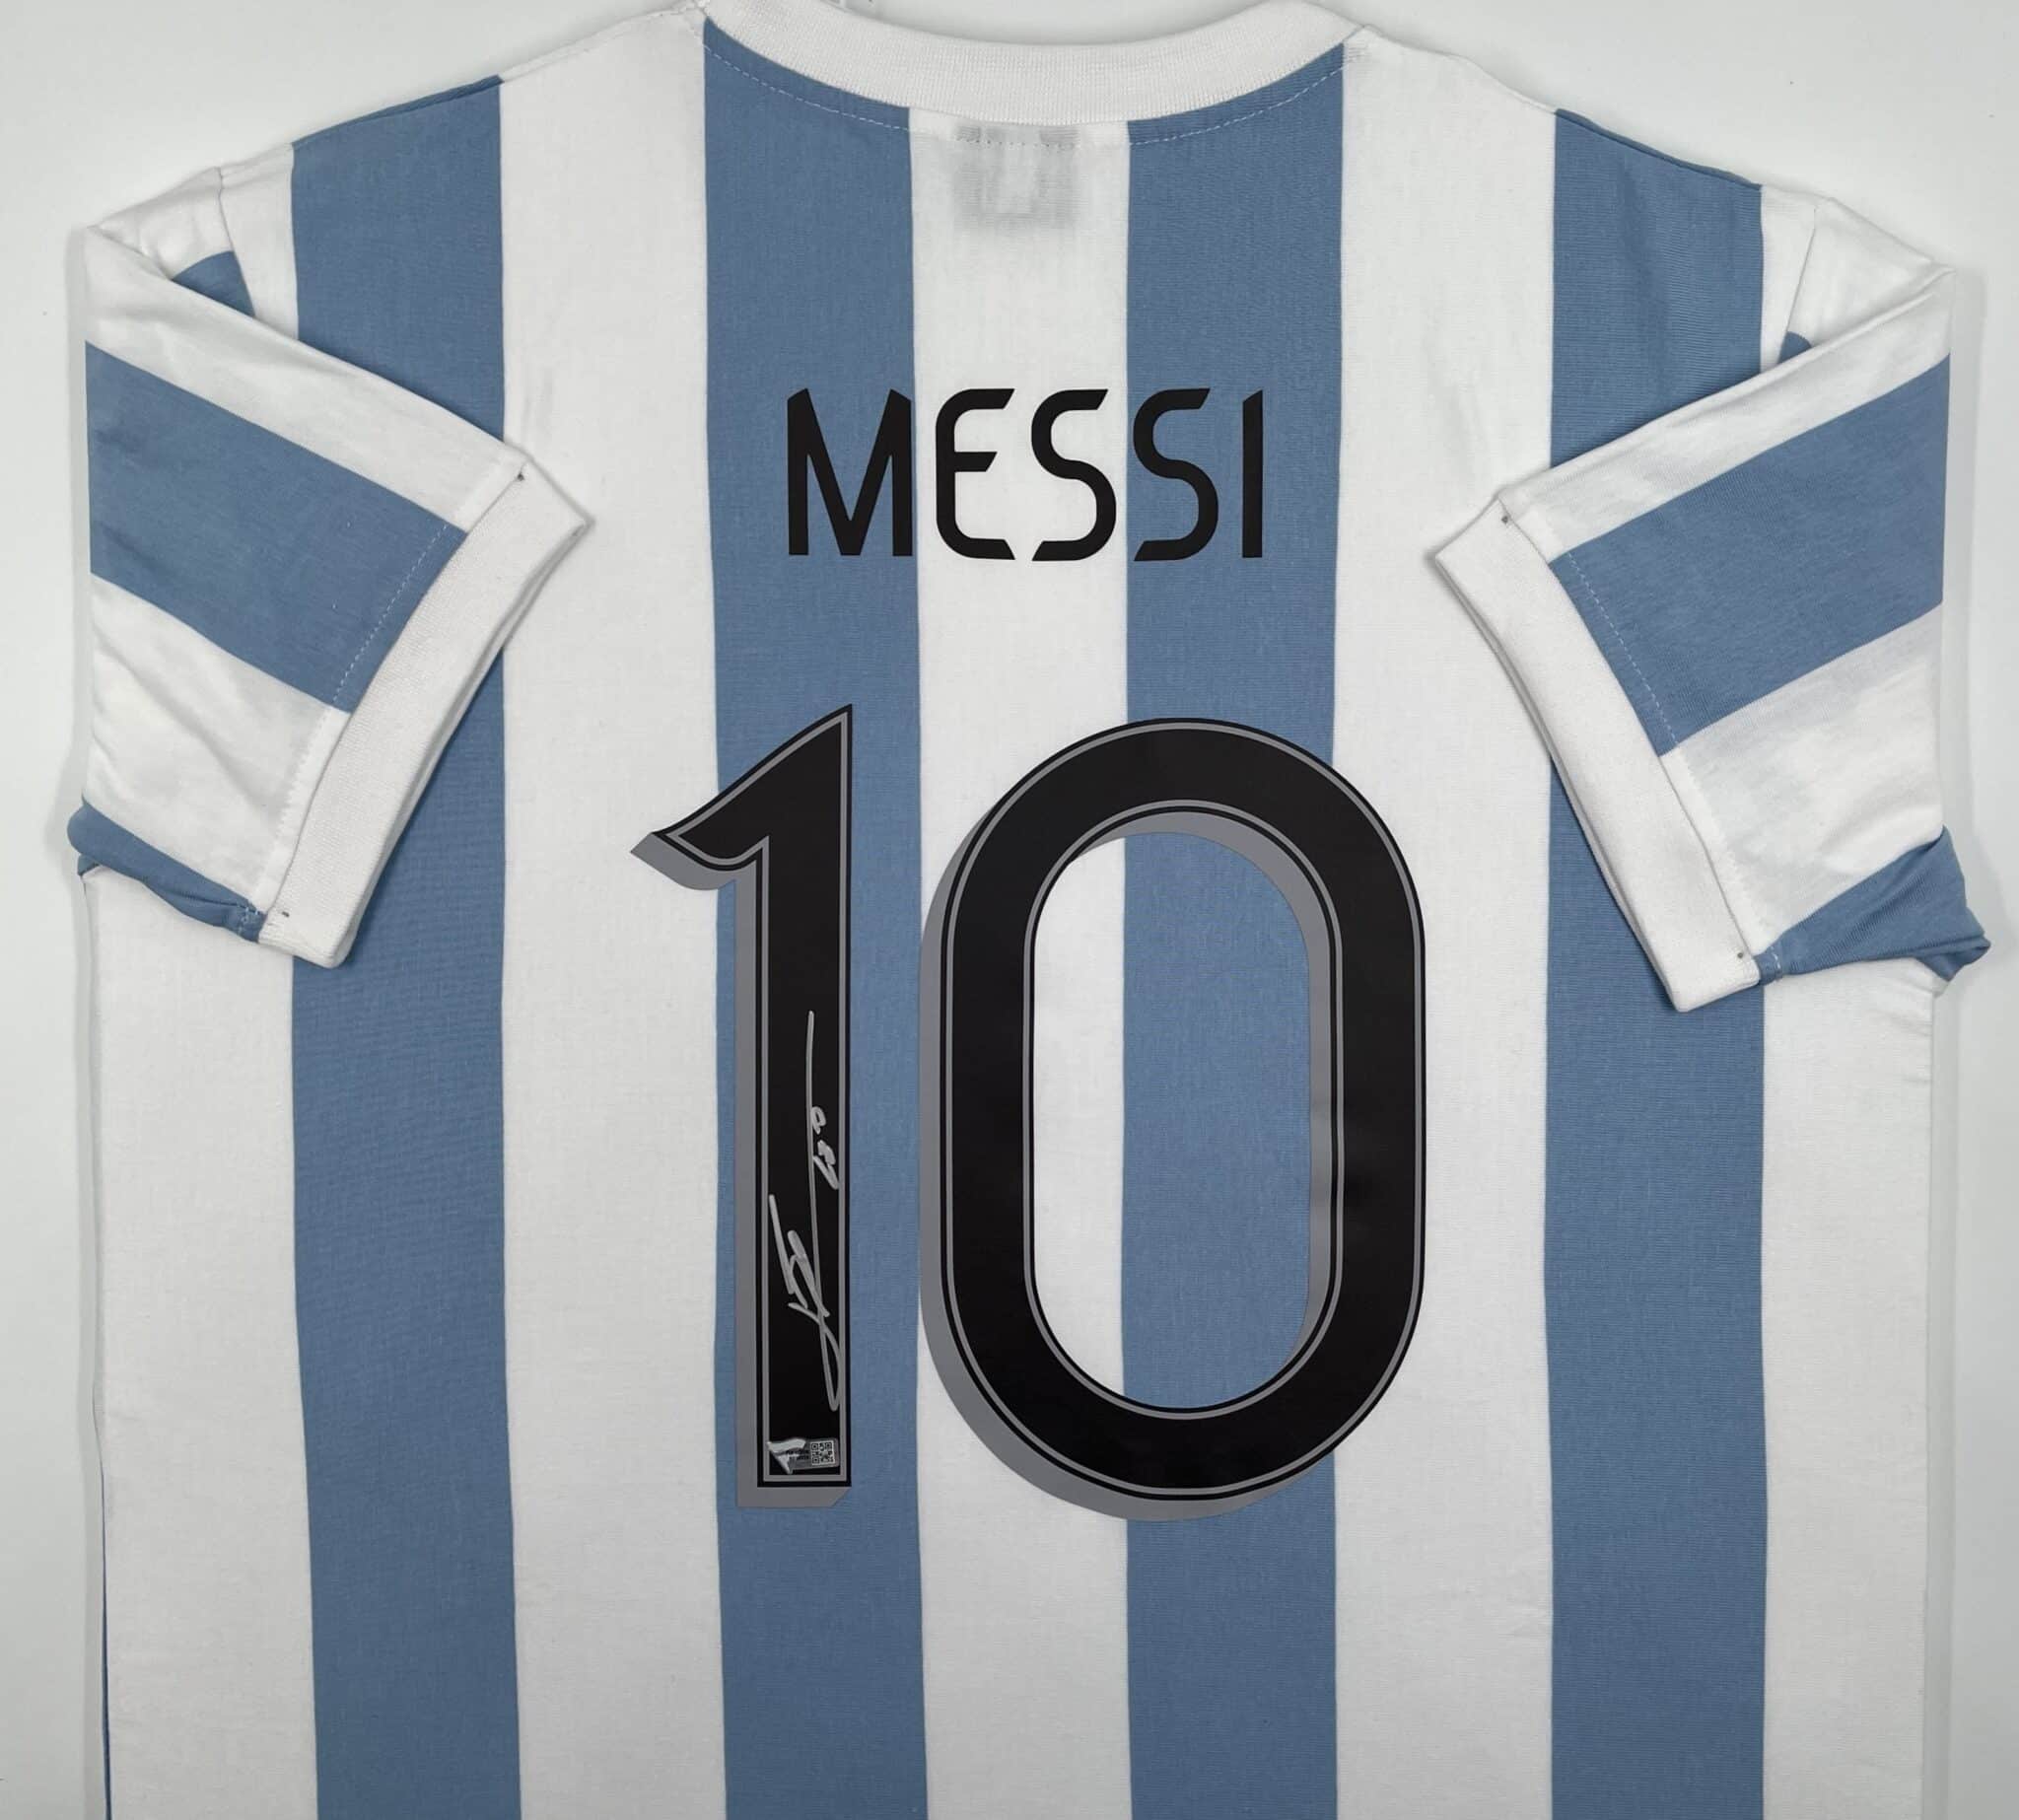 Lionel Messi Argentina Team Replica Signed Shirt with Silver Signature [B536233]